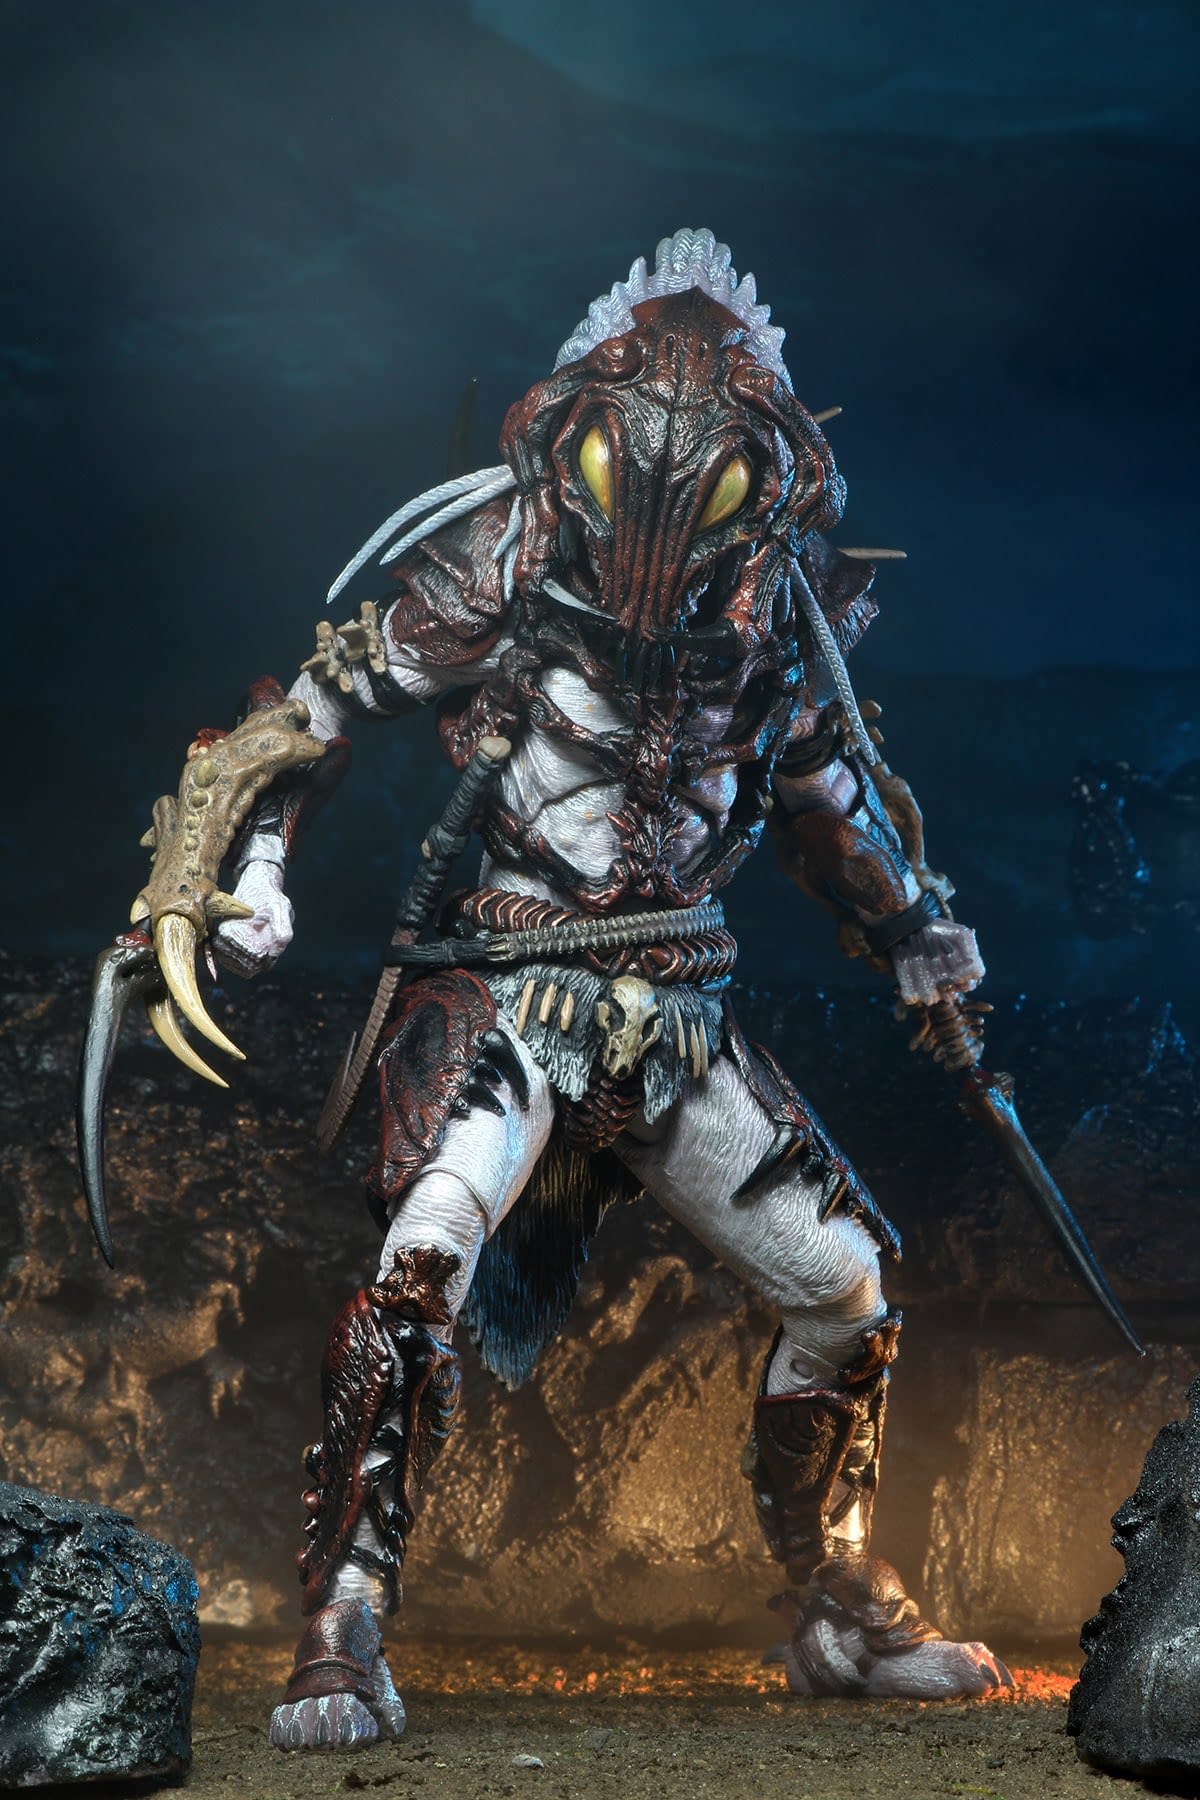 NECA Gives Us a Taste of the Upcoming Alpha Predator Figure